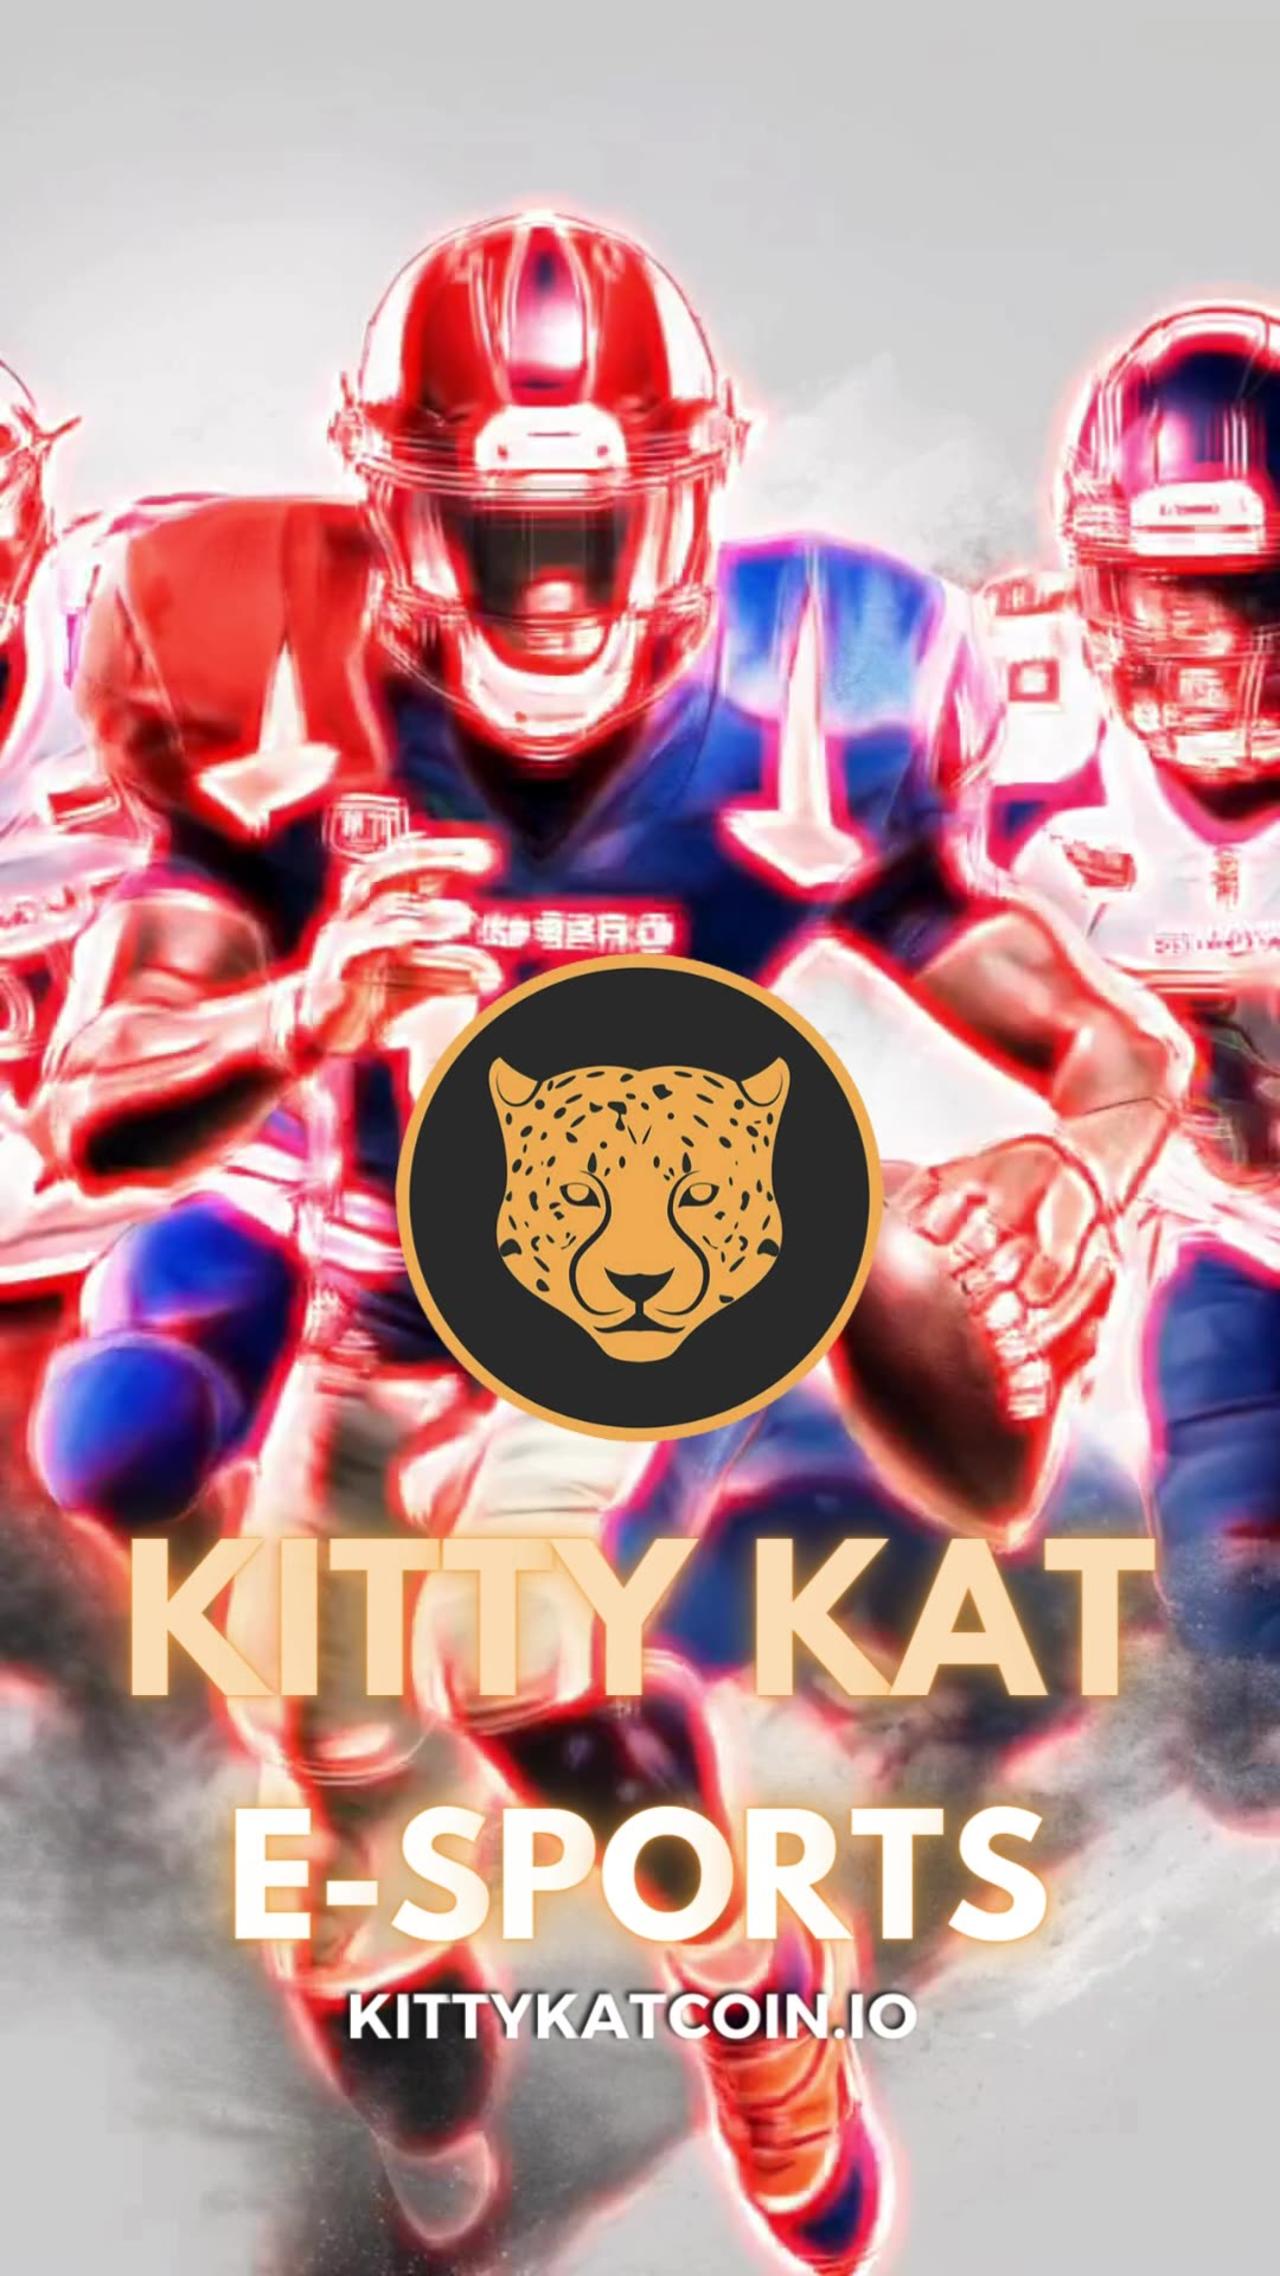 Touchdown for #KittyKatCoin! Kitty claws are shredding the esports field.